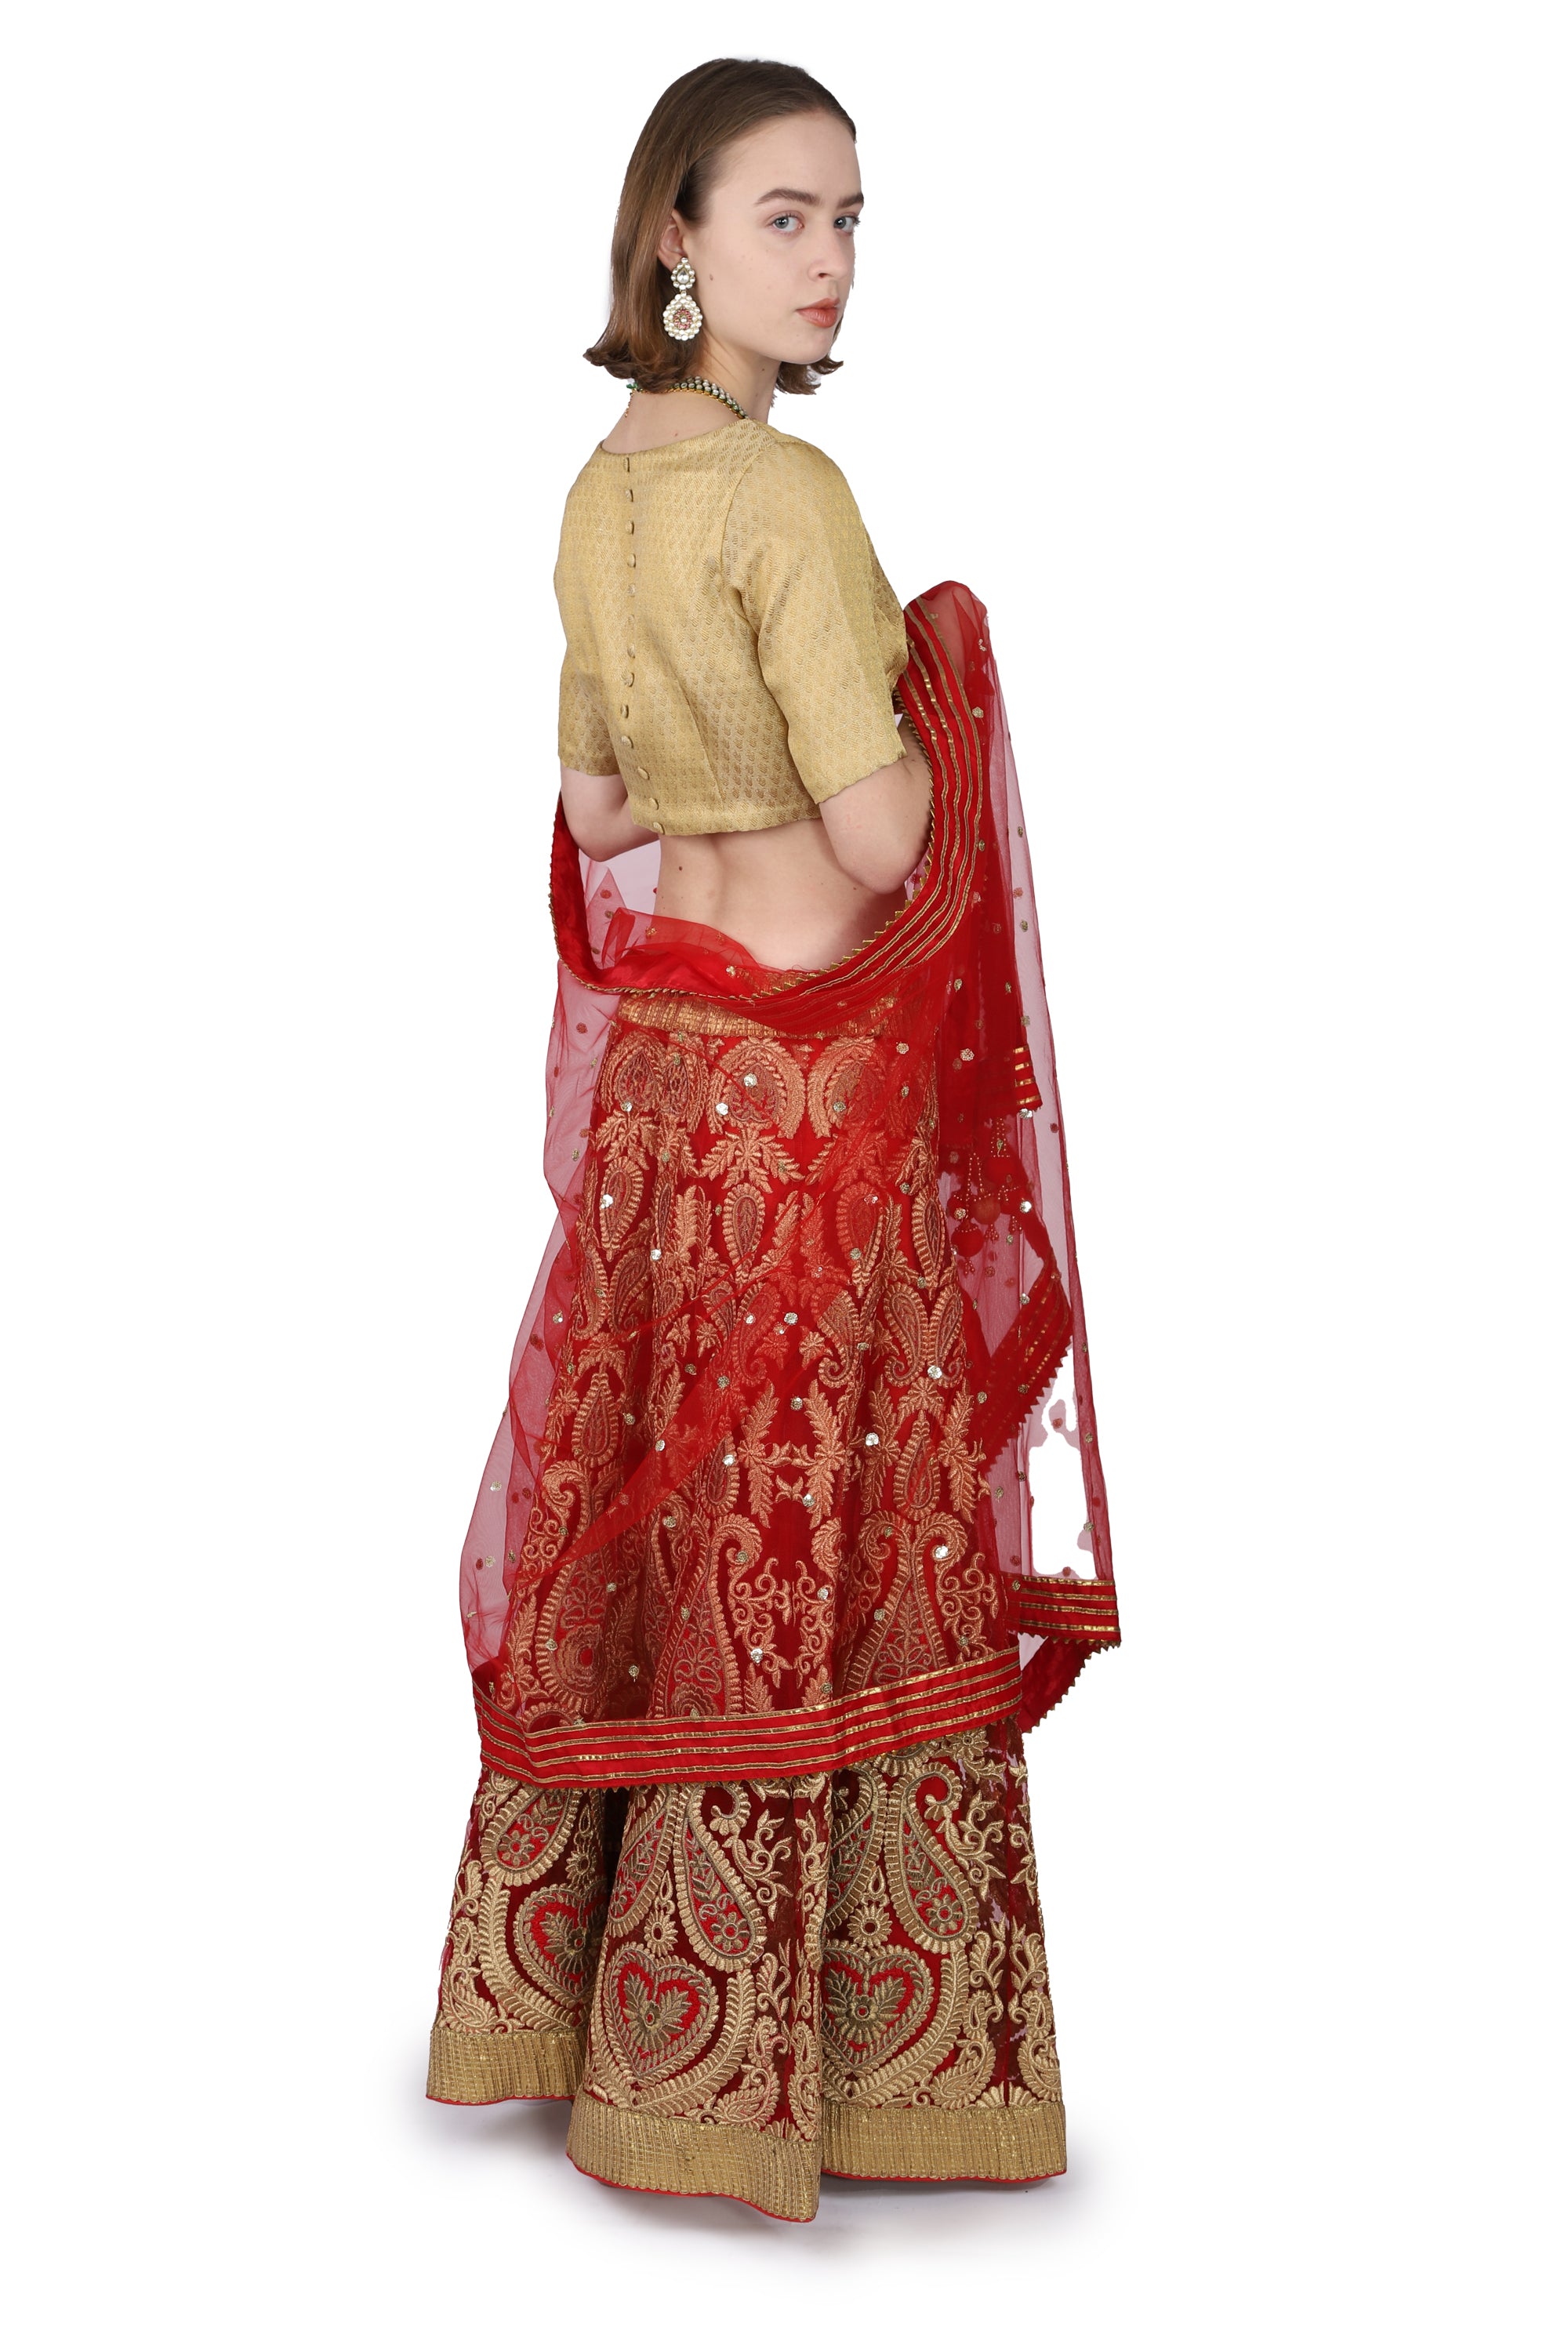 Red and Gold Lahenga/Bridal/Gold Ari Embroidery